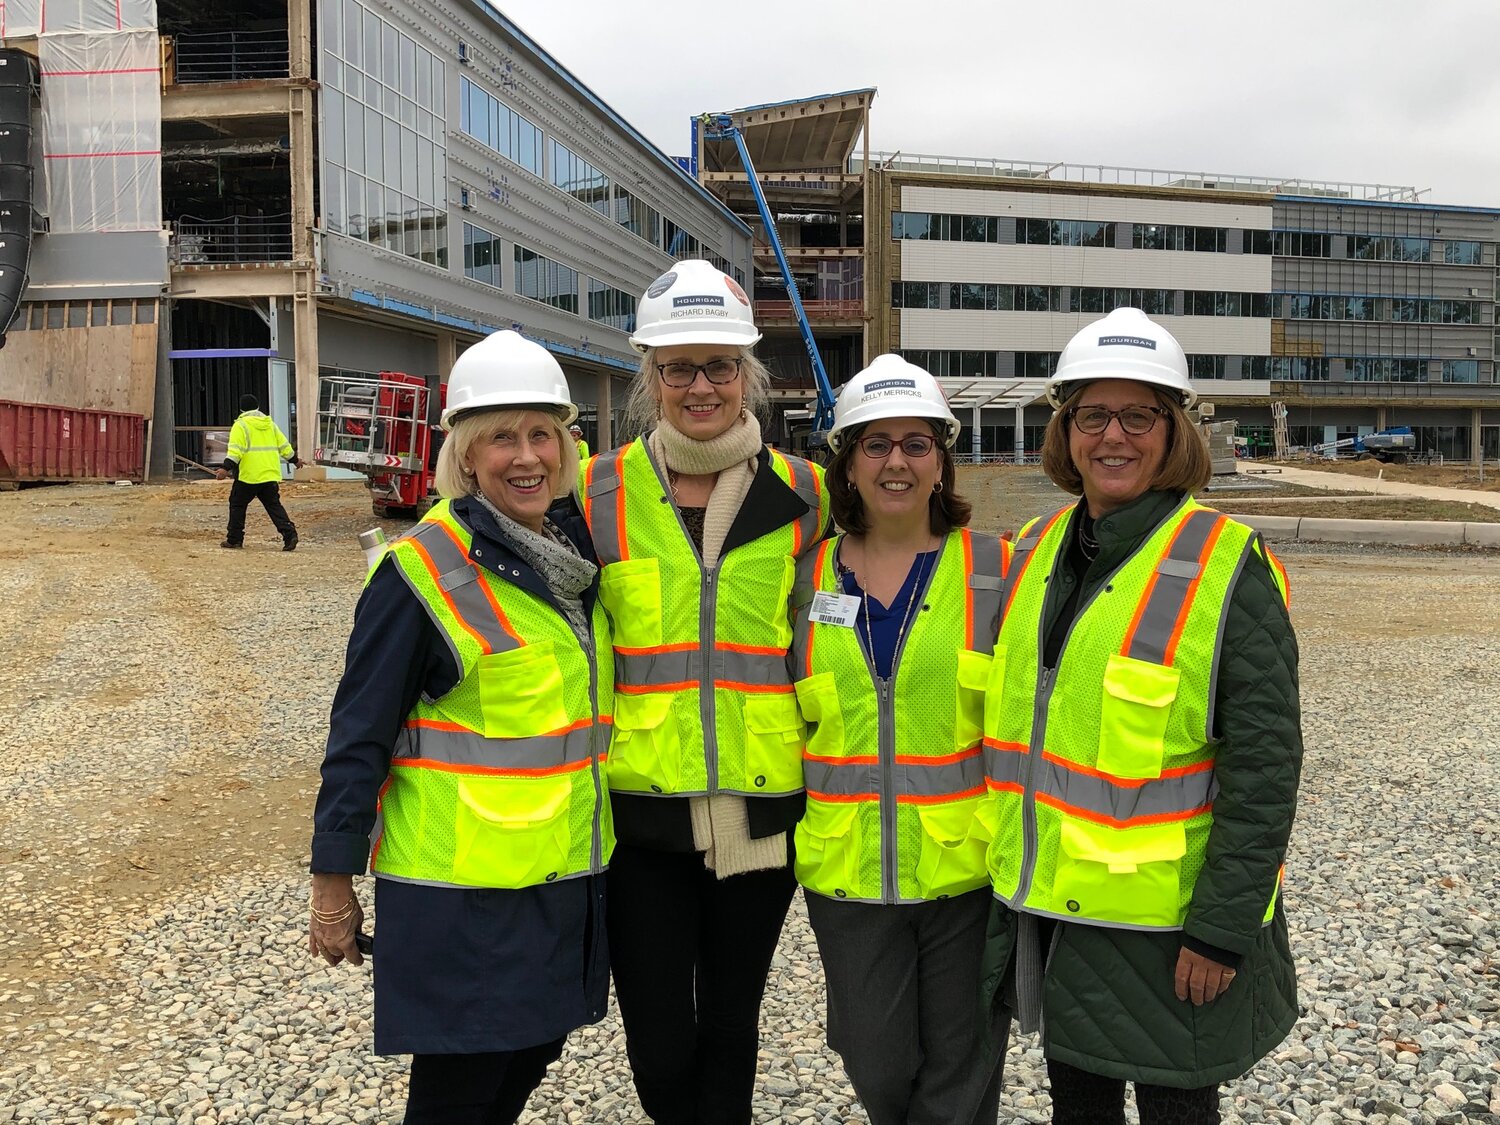 Roberta Keller of Alexis Advisors and her sister, Bet, visit the site of the new rehabilitation center being built by Sheltering Arms Institute in partnership with VCU Health. As part of their Annual Giving Back, Alexis Advisors will donate all proc…